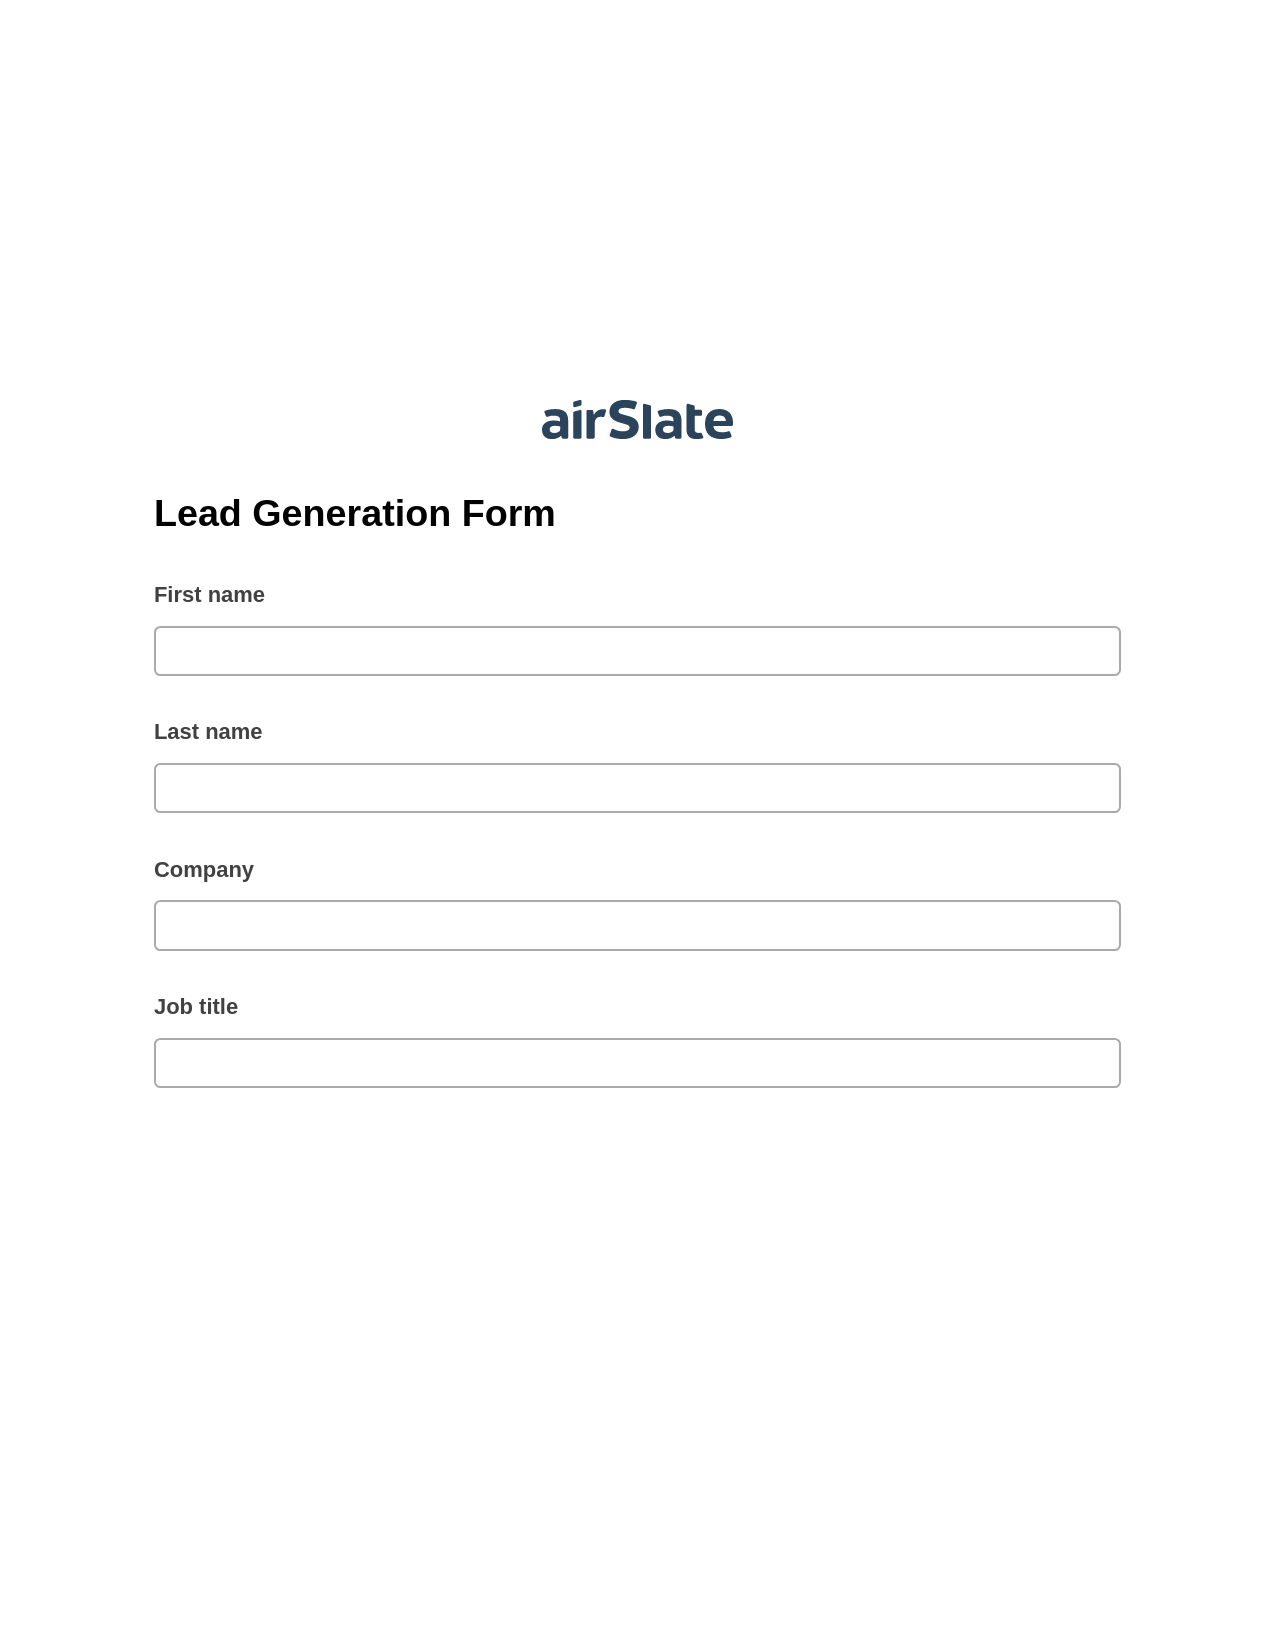 Lead Generation Form Pre-fill Dropdowns from MySQL Bot, Send a Slate with Roles Bot, Archive to OneDrive Bot